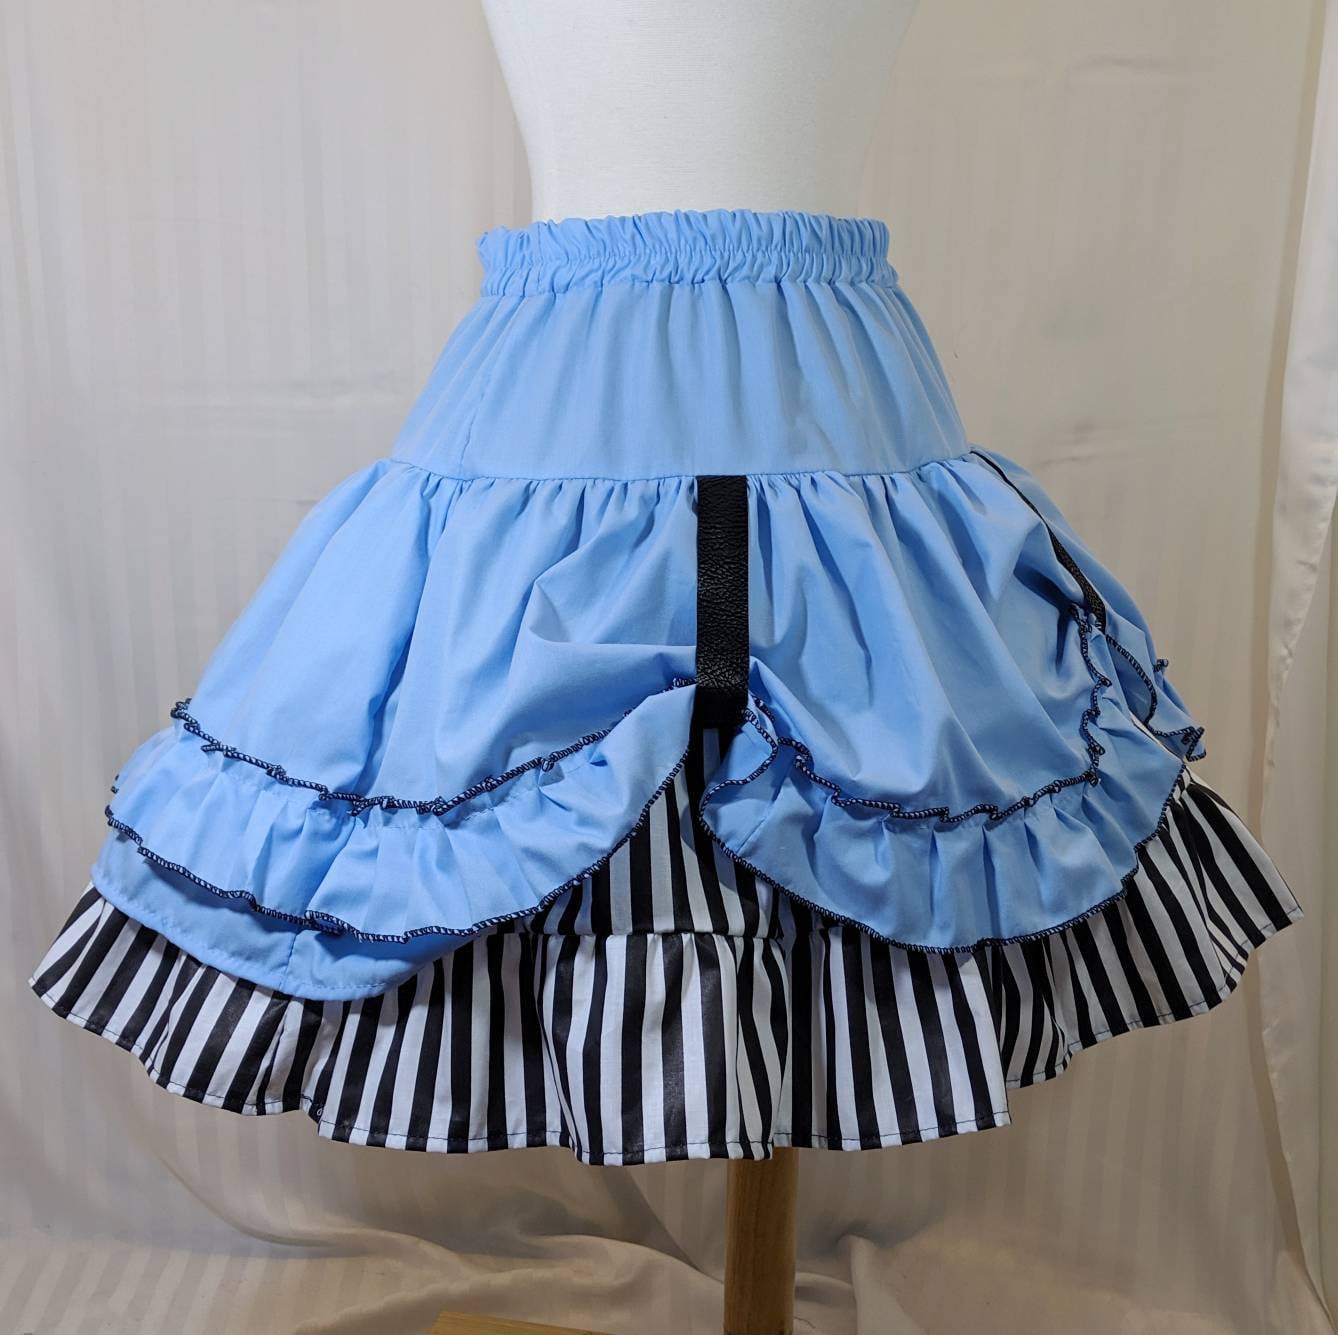 NEW adult Black white Red Pinstriped Frilly Skirt Gothic rock,lolita  All sizes 